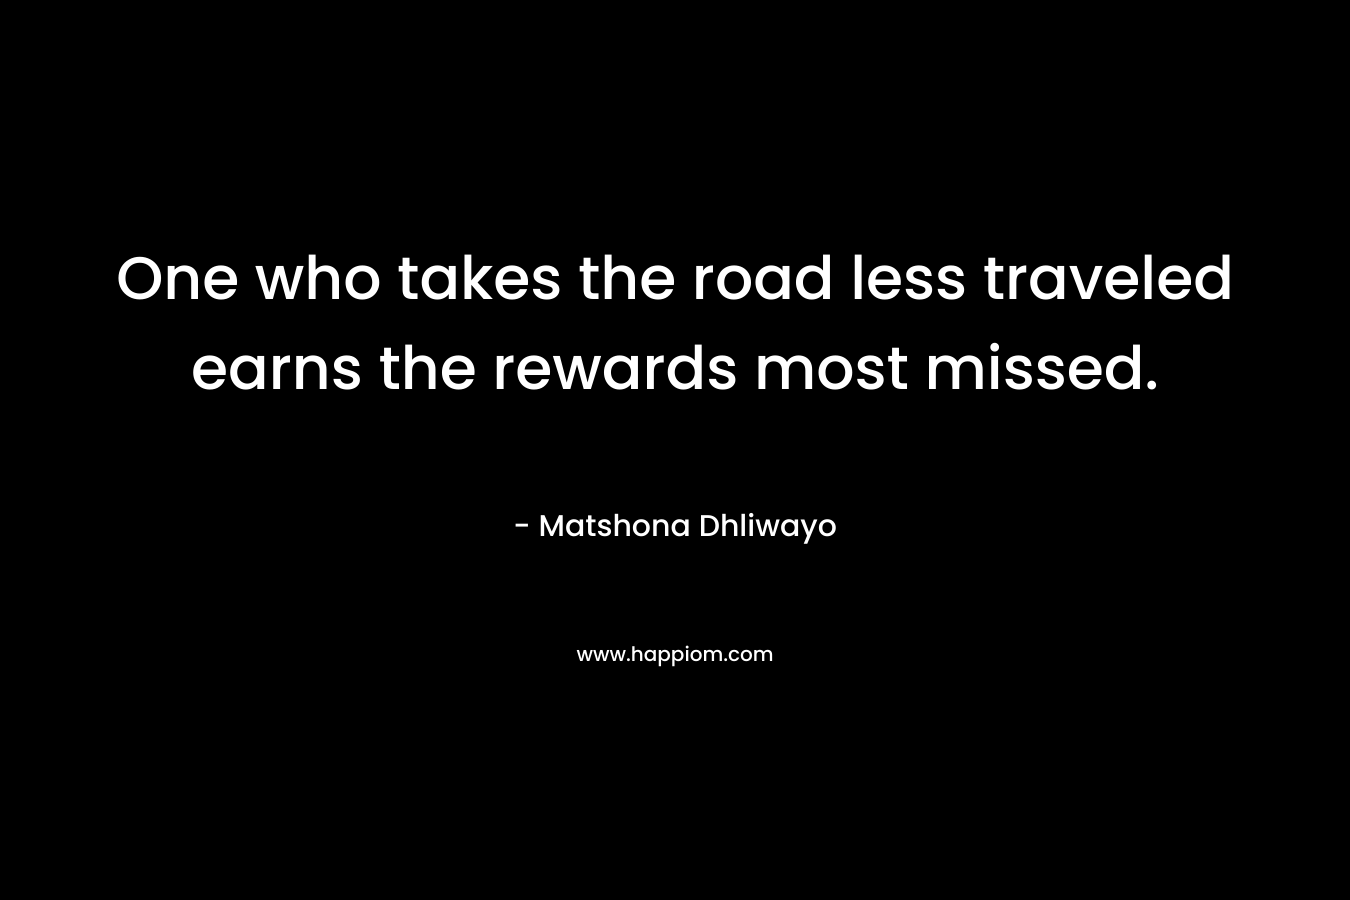 One who takes the road less traveled earns the rewards most missed. – Matshona Dhliwayo